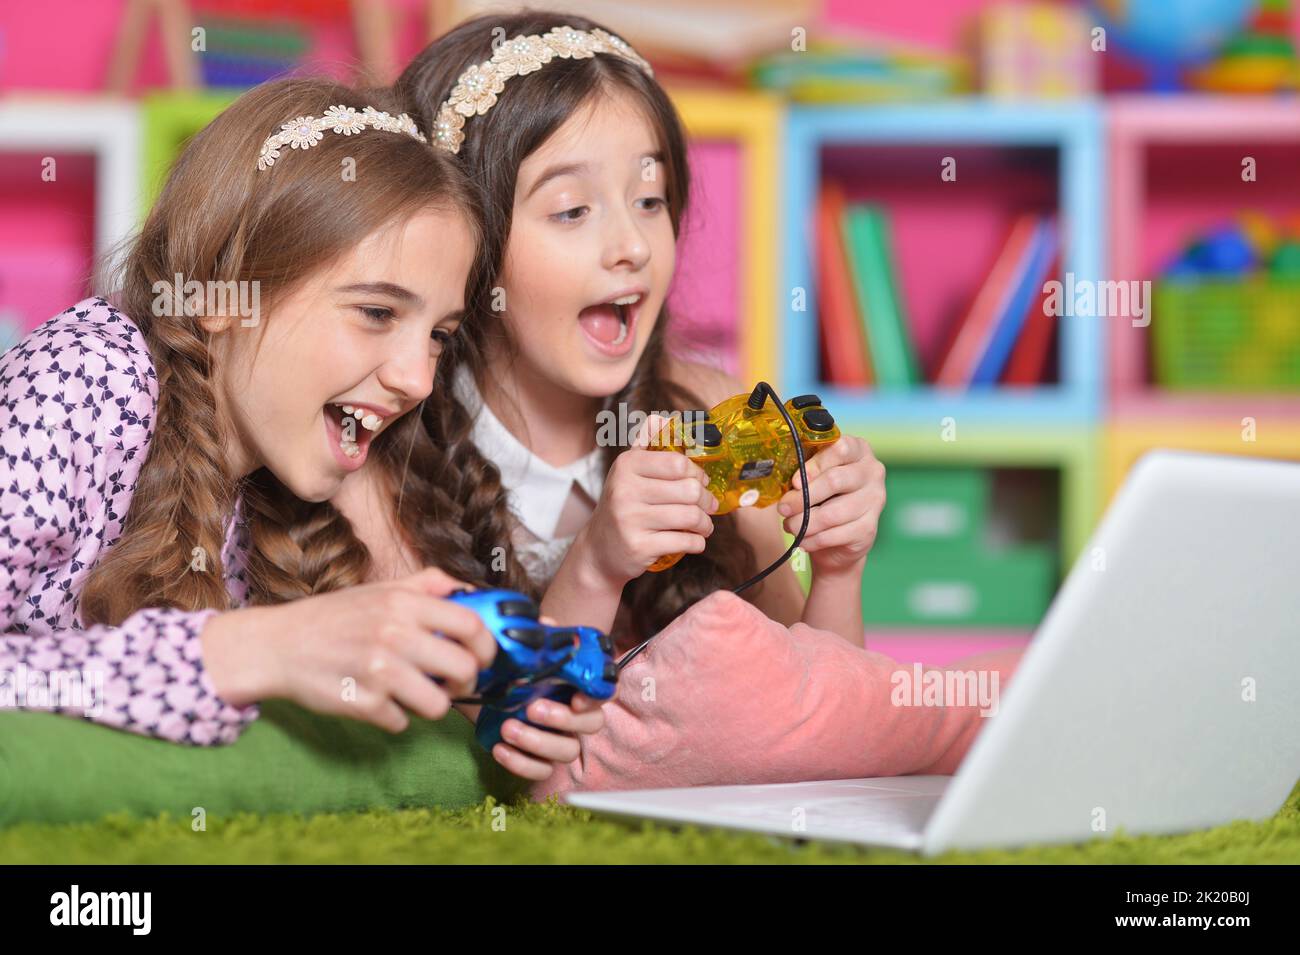 Portrait of two girls playing with joystick and laptop Stock Photo